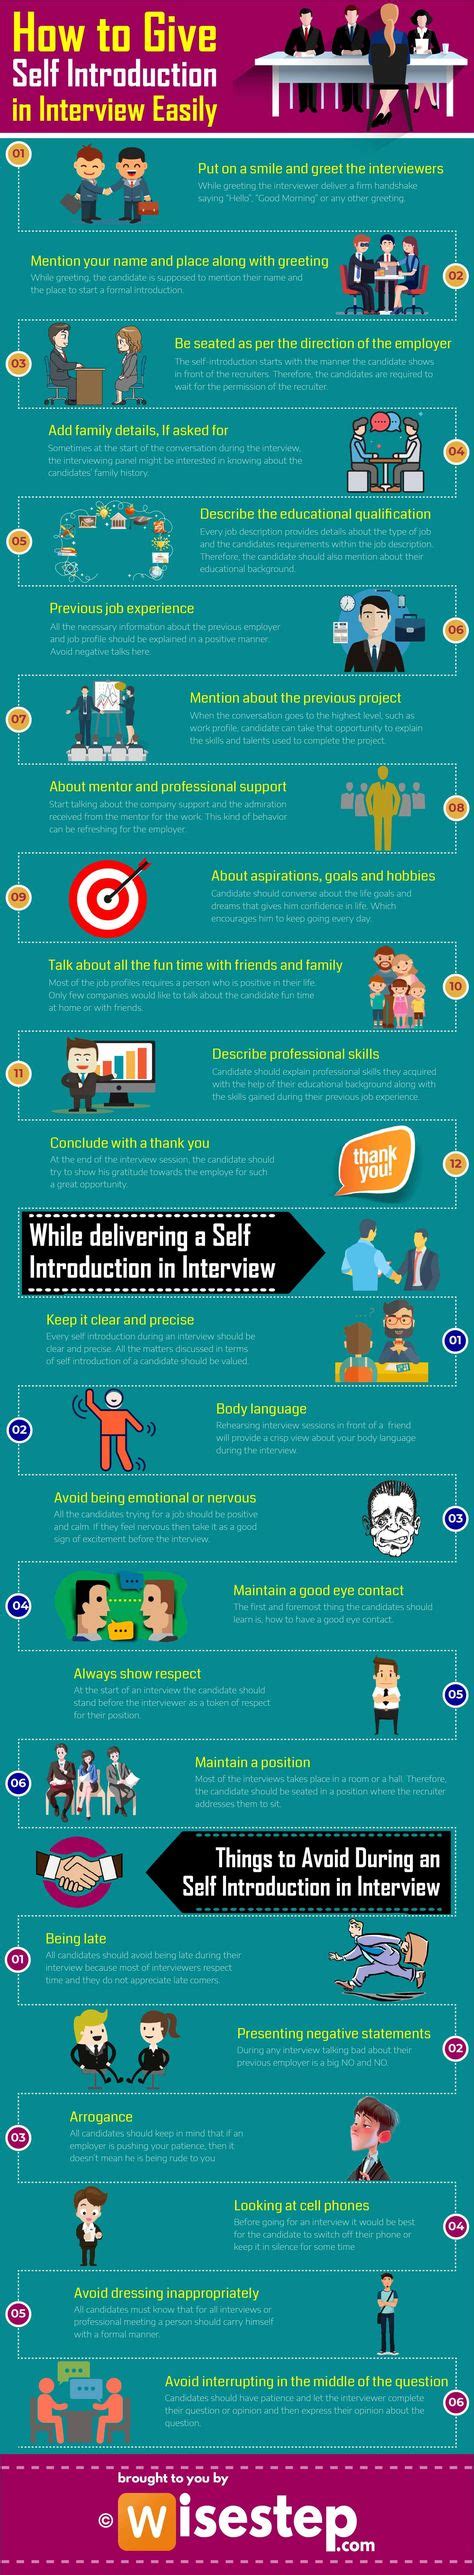 But online, the hiring manager will be looking instead at how you introduce. How to Give Self Introduction in Interview Easily? (With images) | Interview tips, How to ...